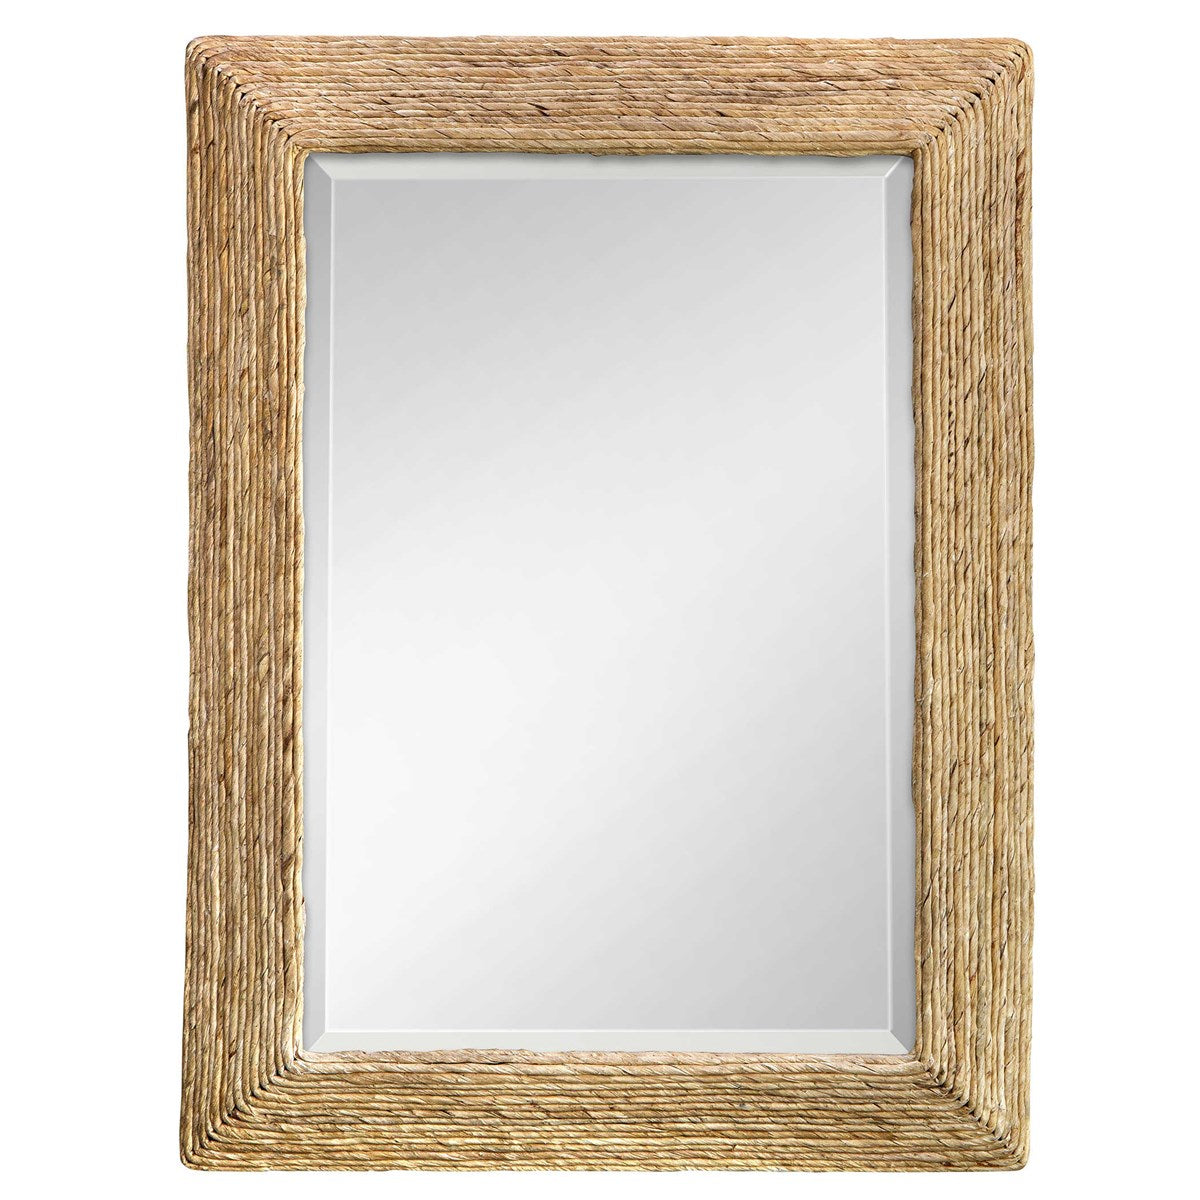 Uttermost Home Decor Oversized-Rate to be Quoted Uttermost Rora Mirror